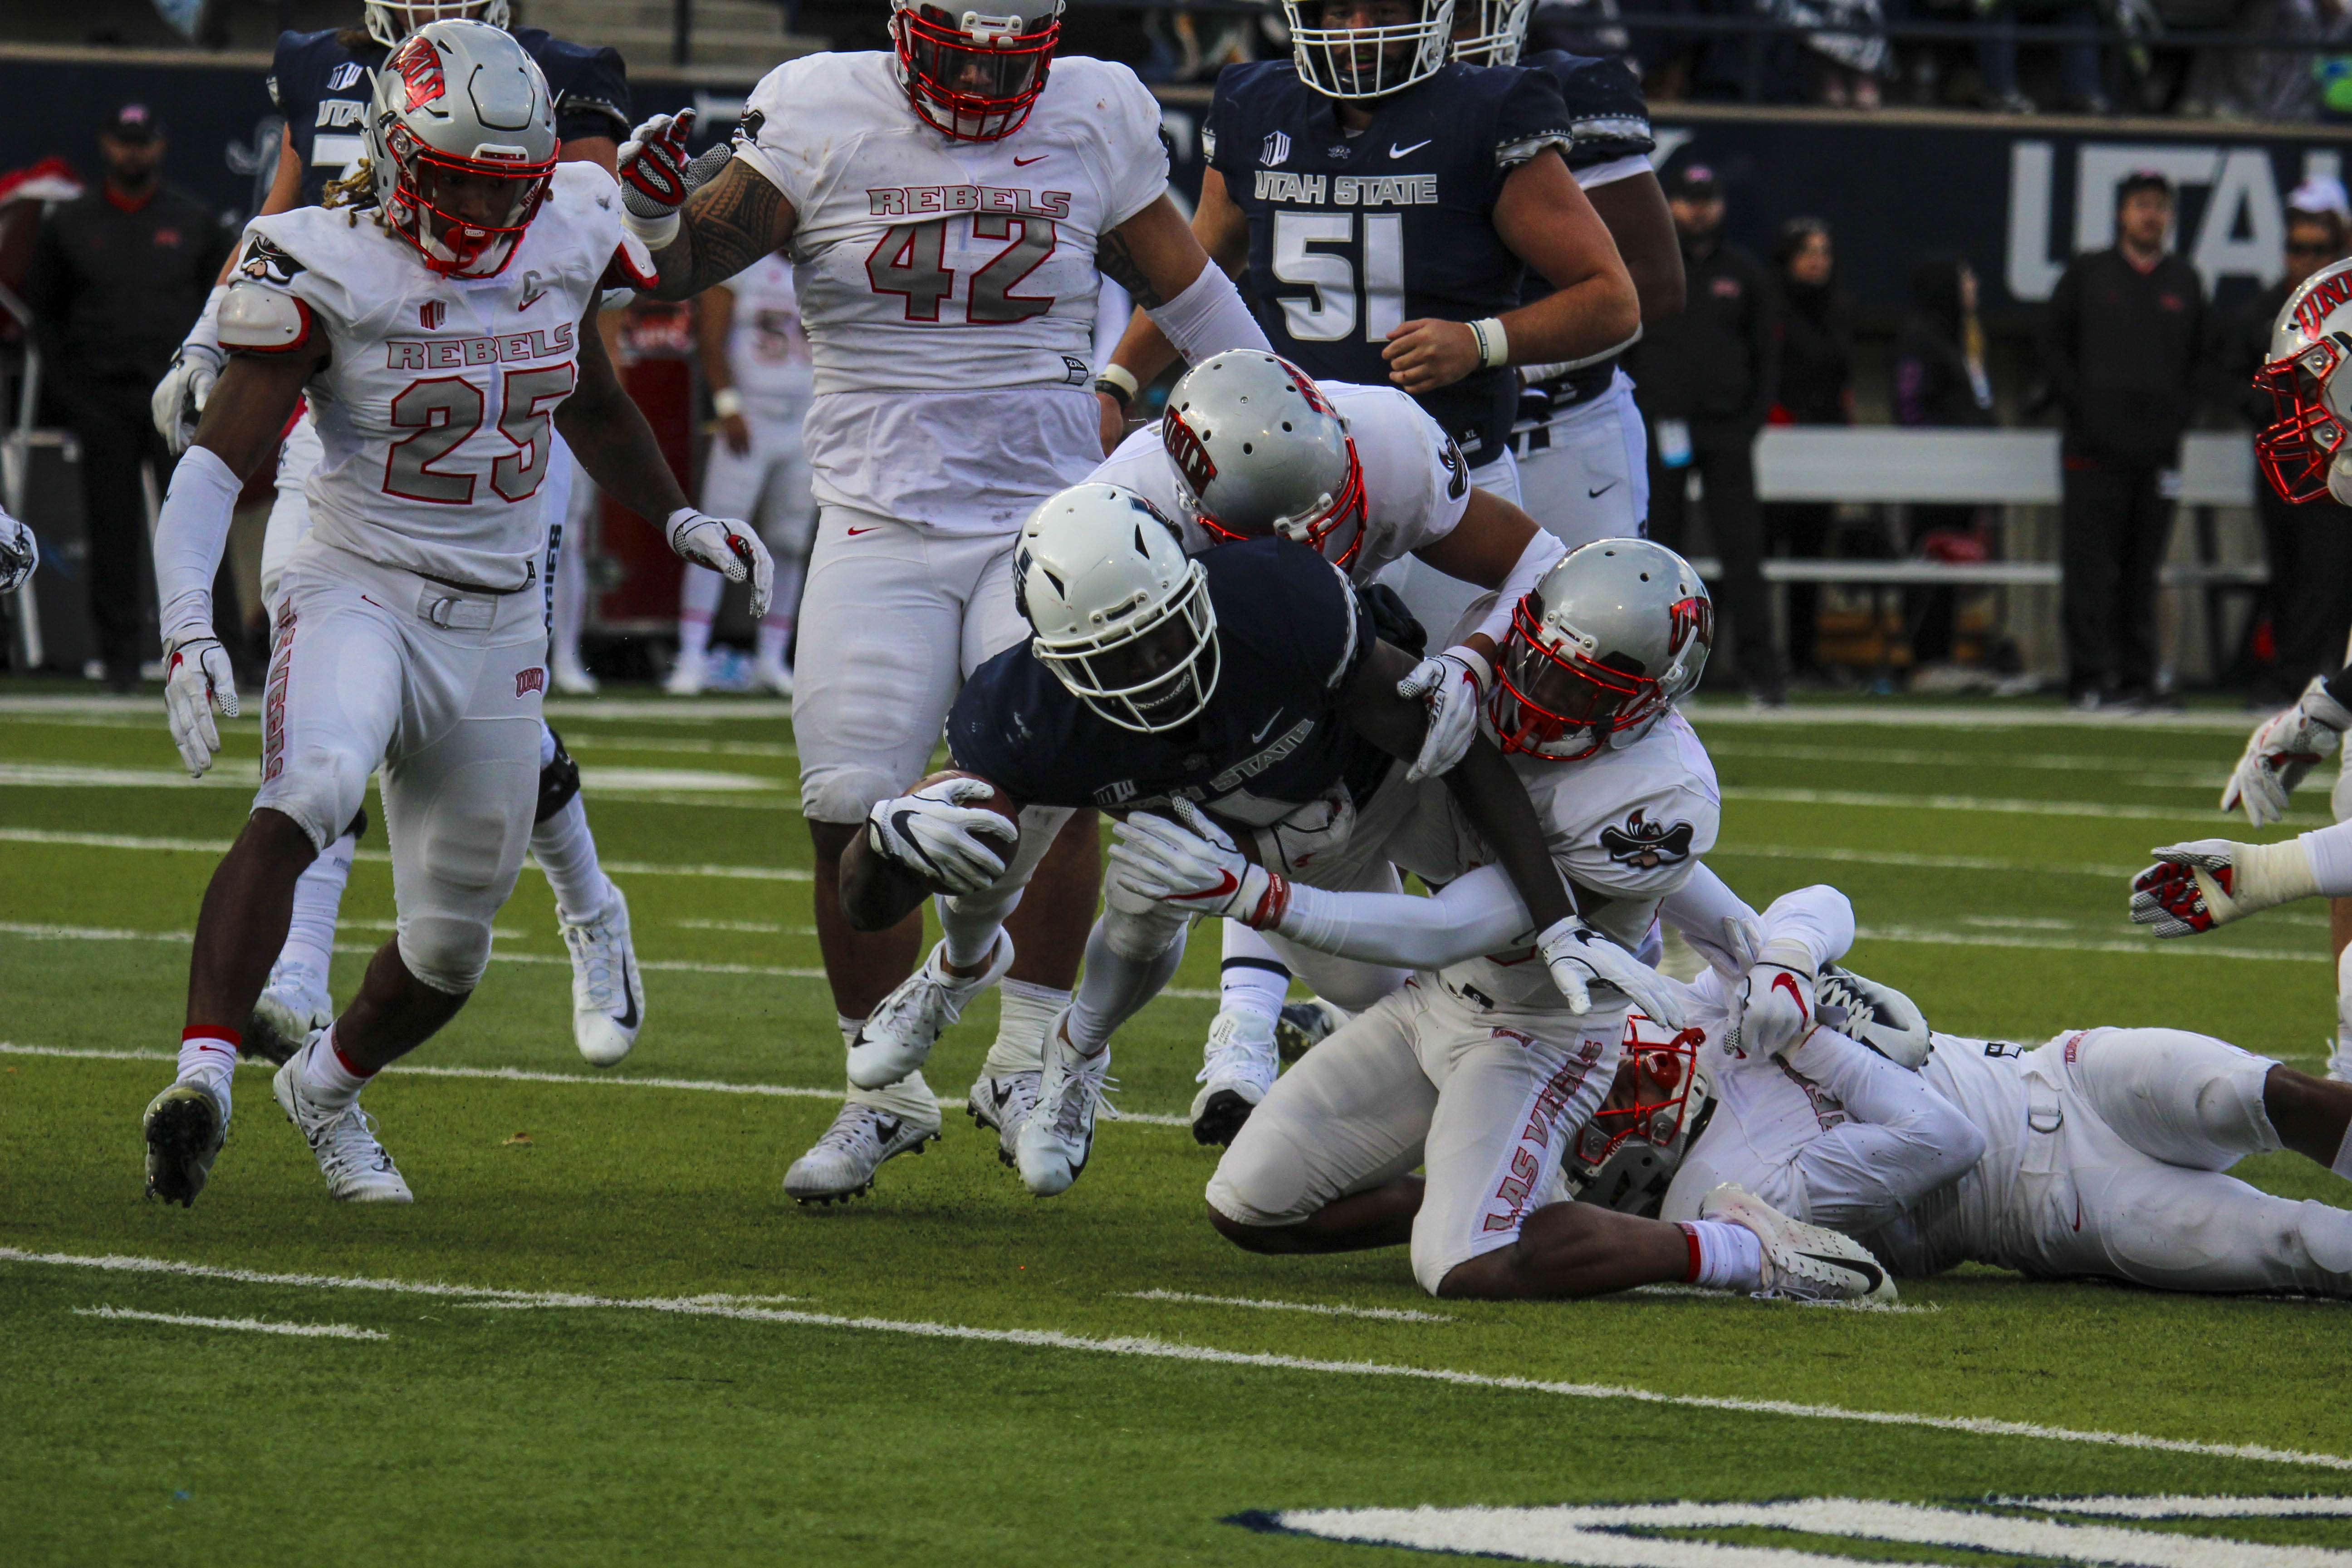 Domination Love throws 5 touchdowns to lead Utah State past